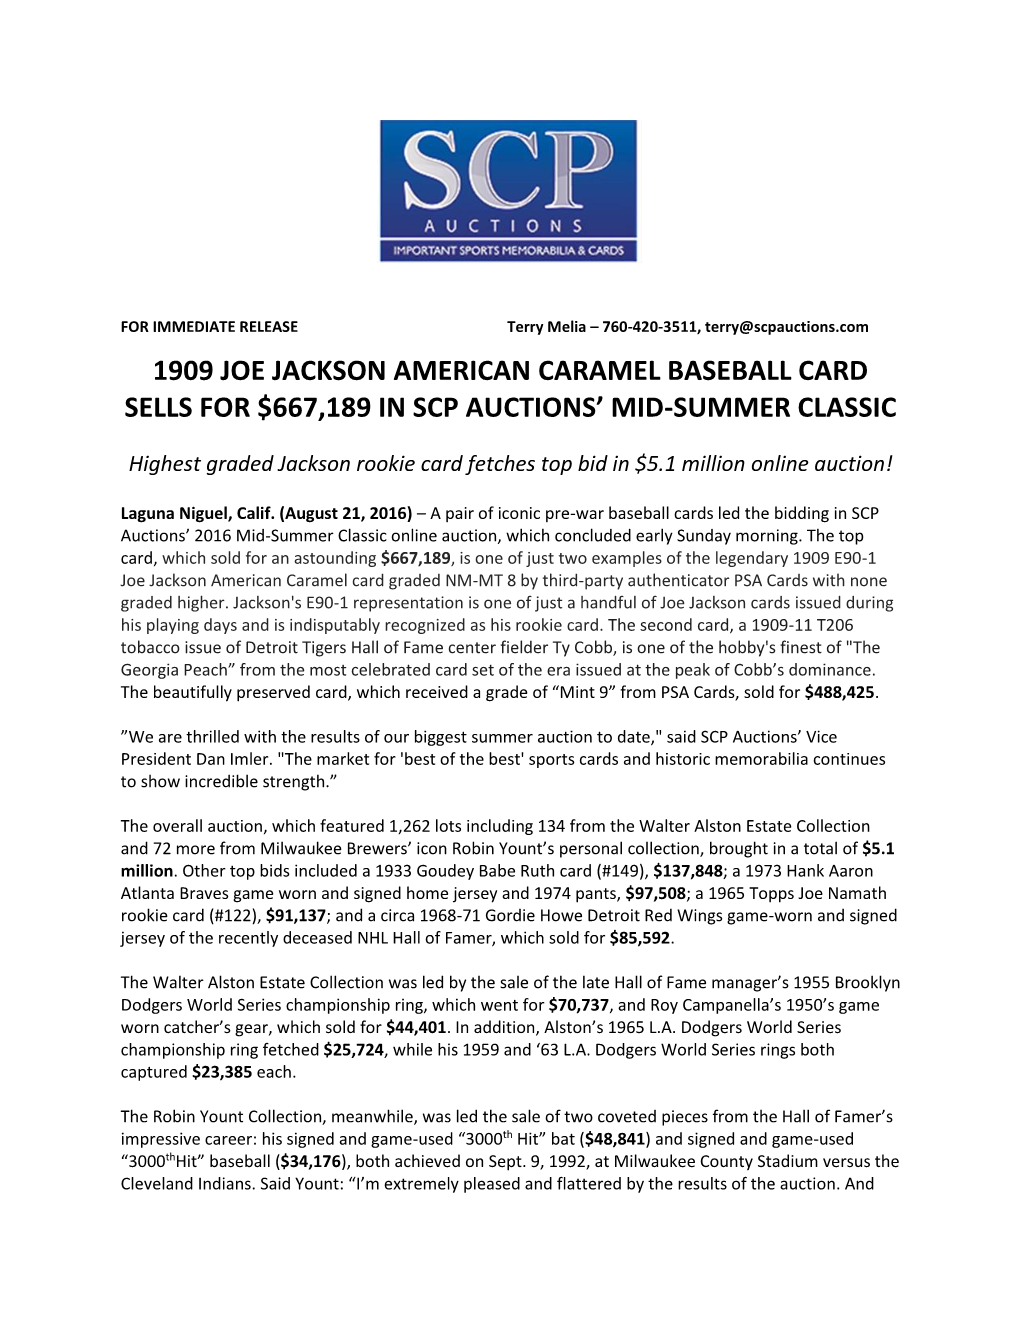 1909 Joe Jackson American Caramel Baseball Card Sells for $667,189 in Scp Auctions’ Mid-Summer Classic